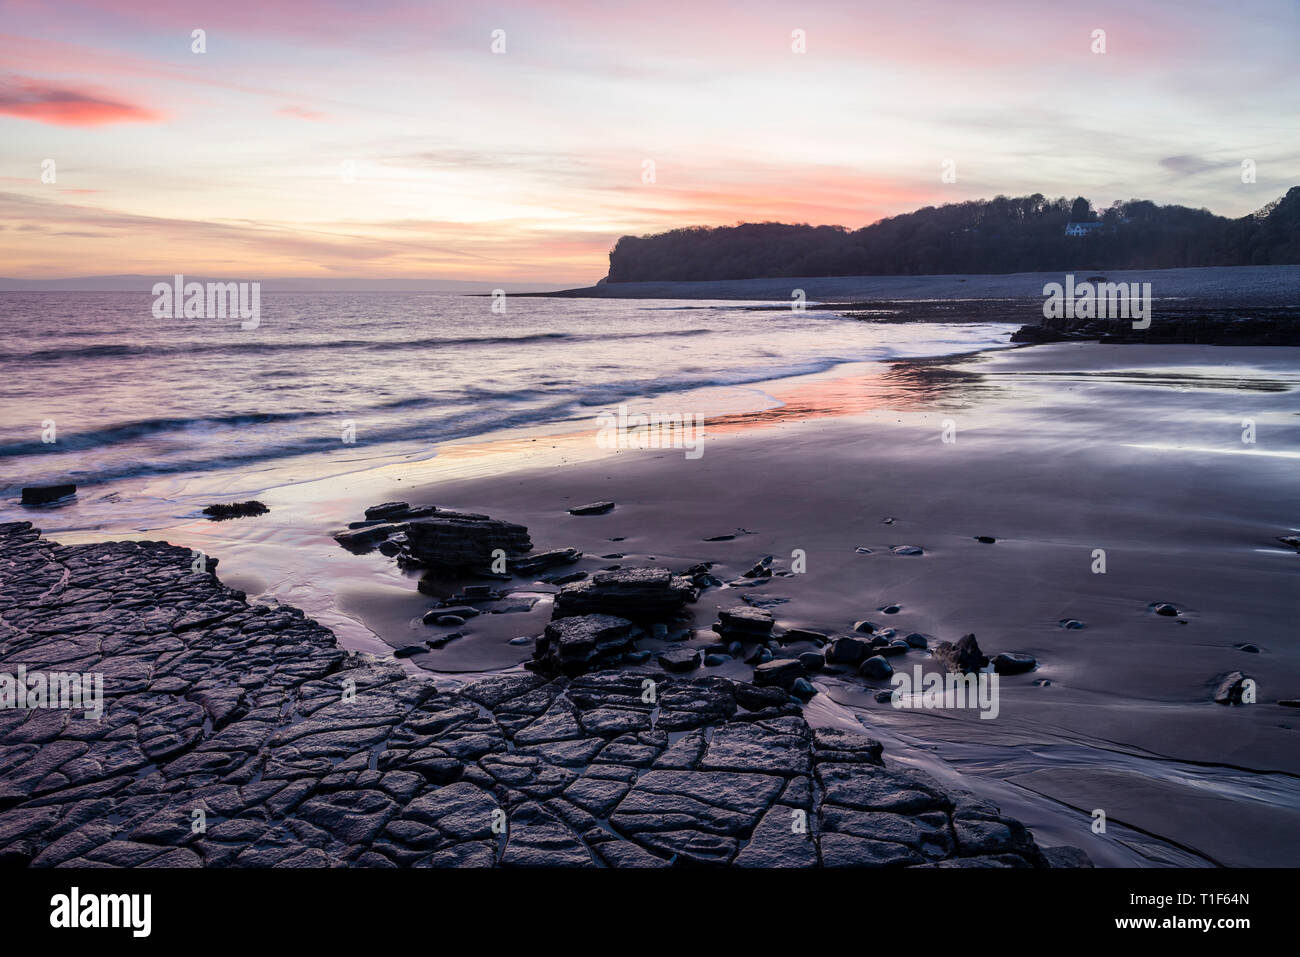 A tranquil coastal and seascape scenic view at sunset at Barry, South Wales Stock Photo